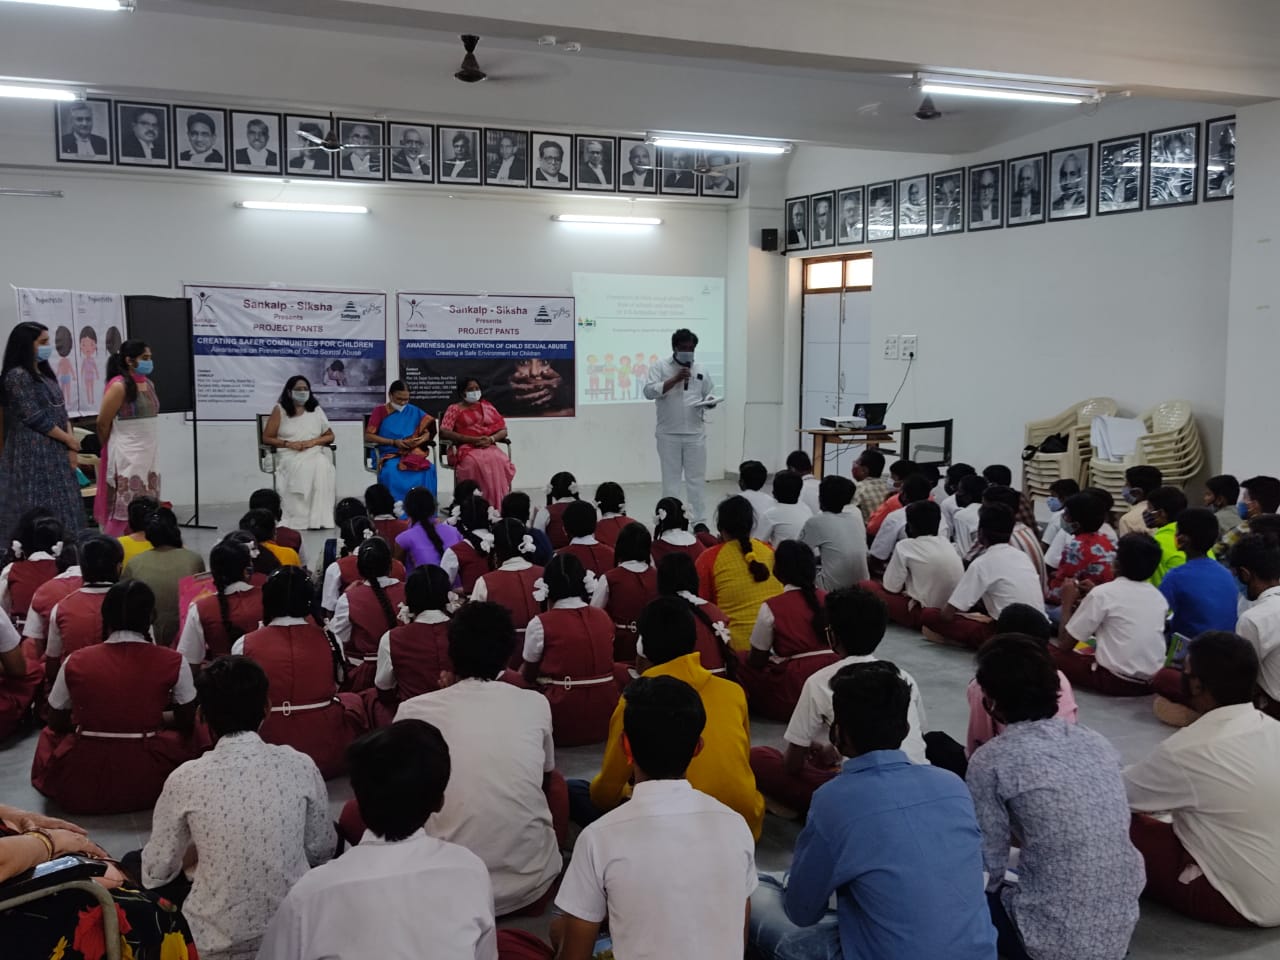 Sankalp-Siksha-Project PANTS-Awareness on prevention of Child Sexual Abuse at Dr. B. R. Ambedkar High School